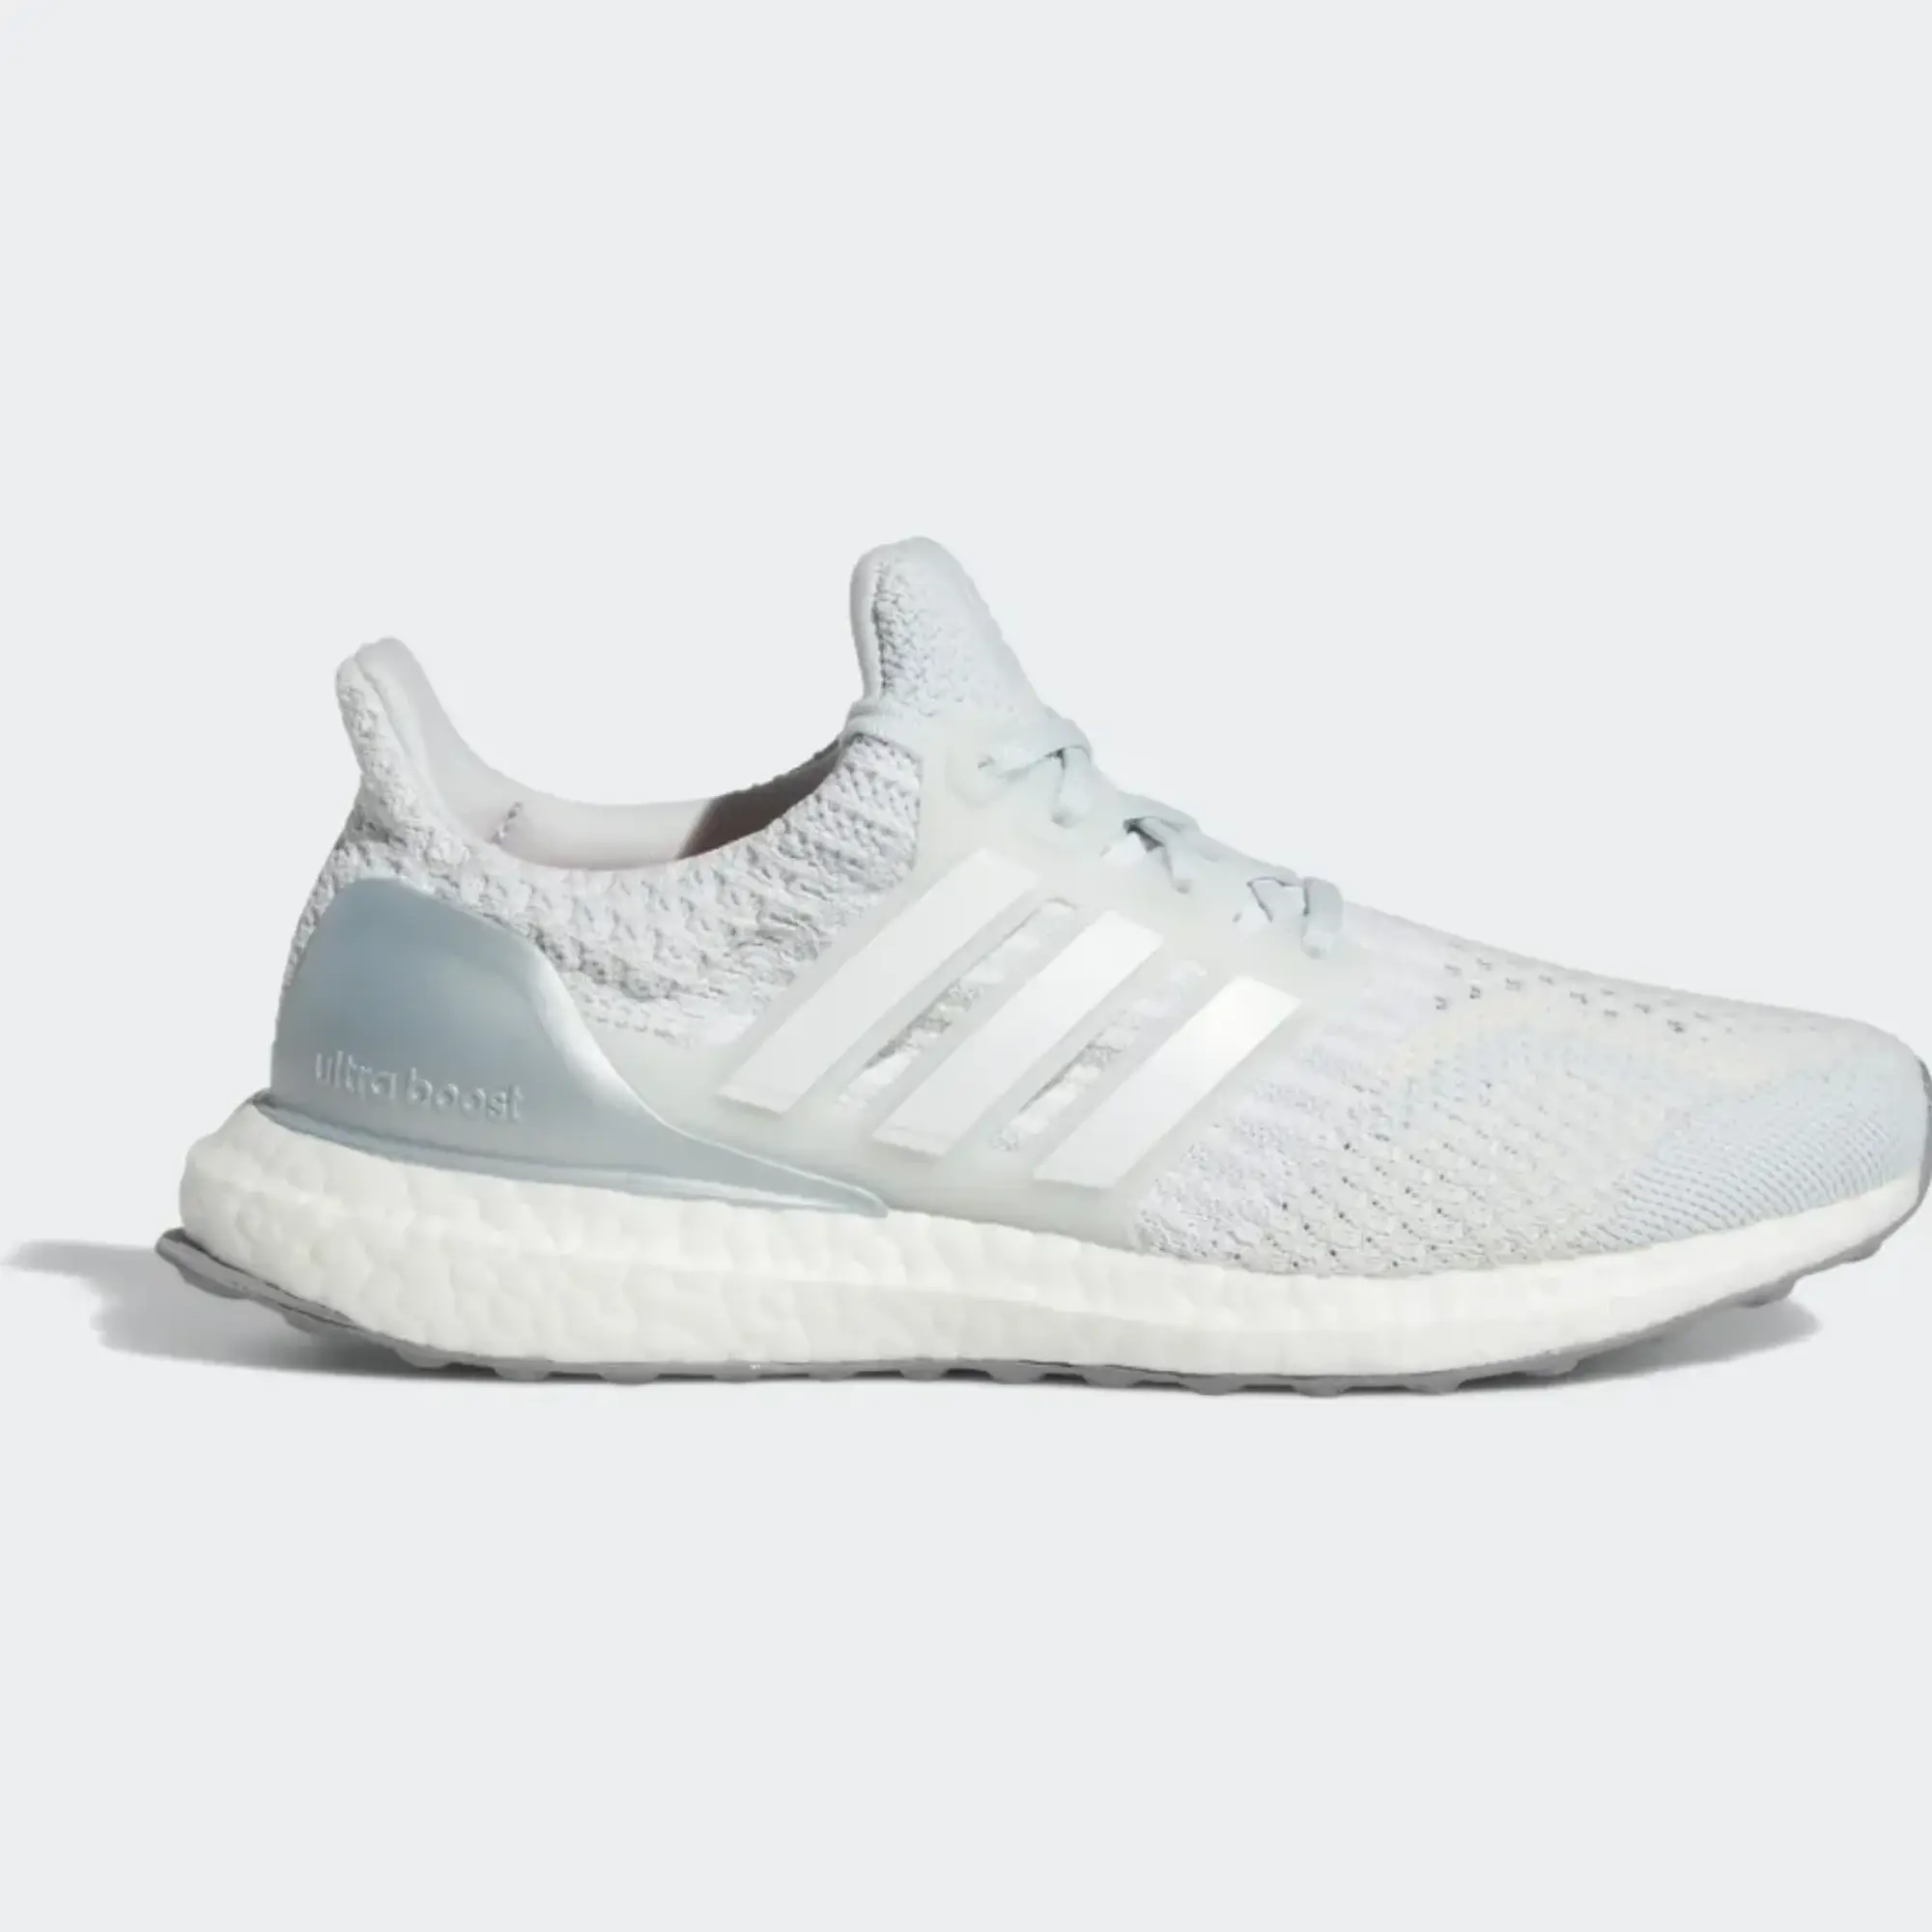 adidas Womenss Ultraboost 5.0 DNA Running Shoes in Light Blue Textile